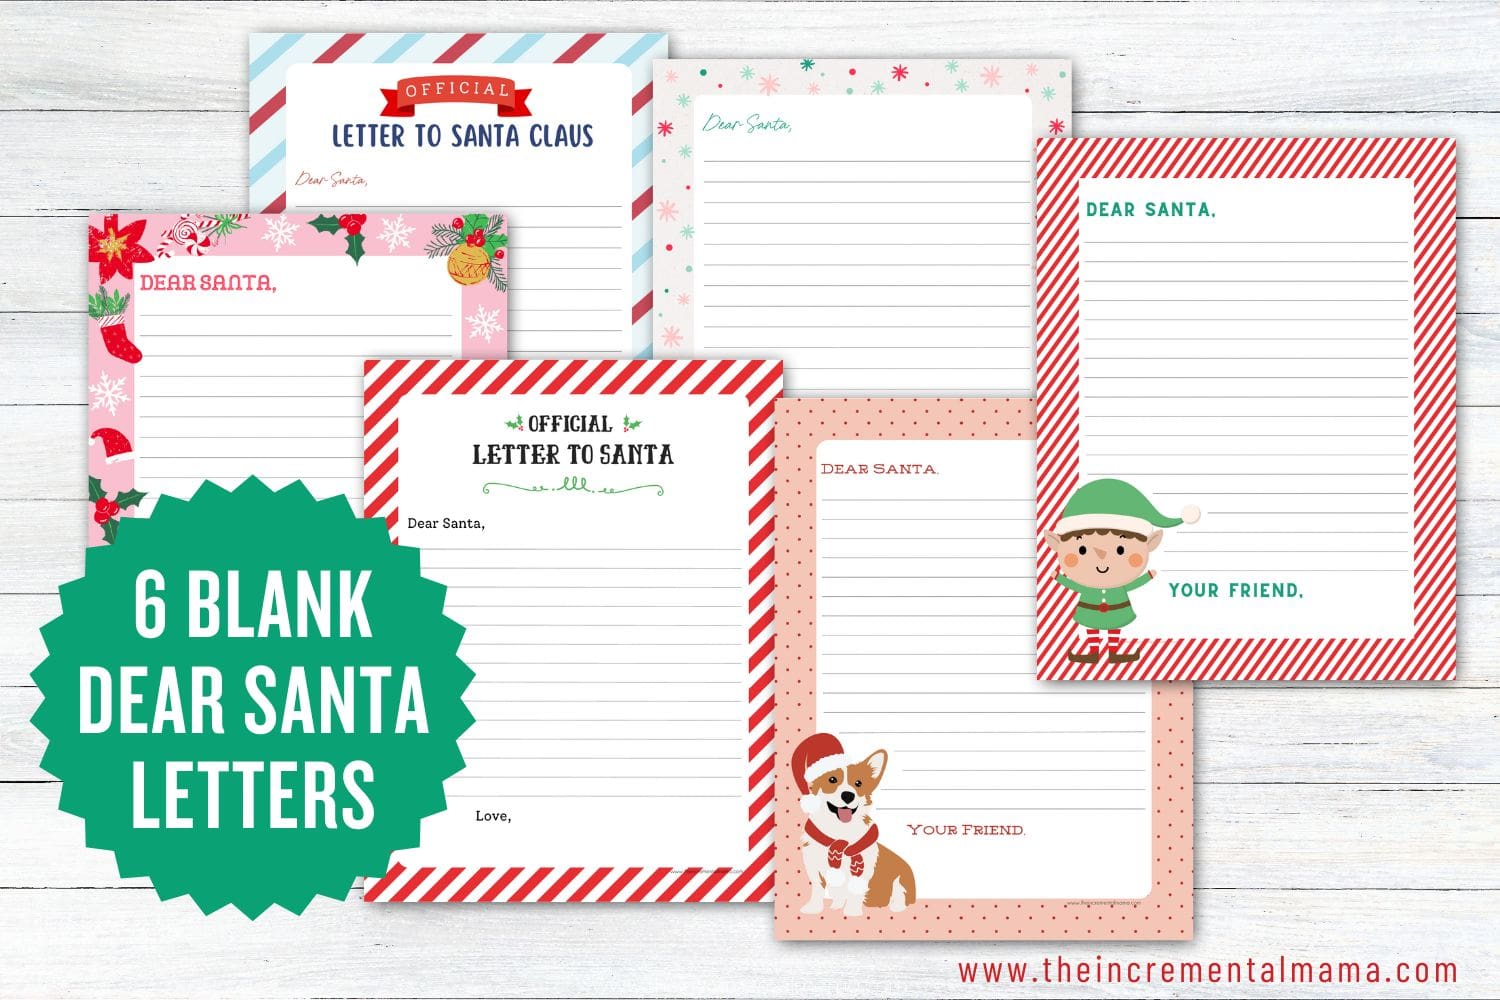 20 Cute & Free Printable Santa Letter Templates For Kids - The ...